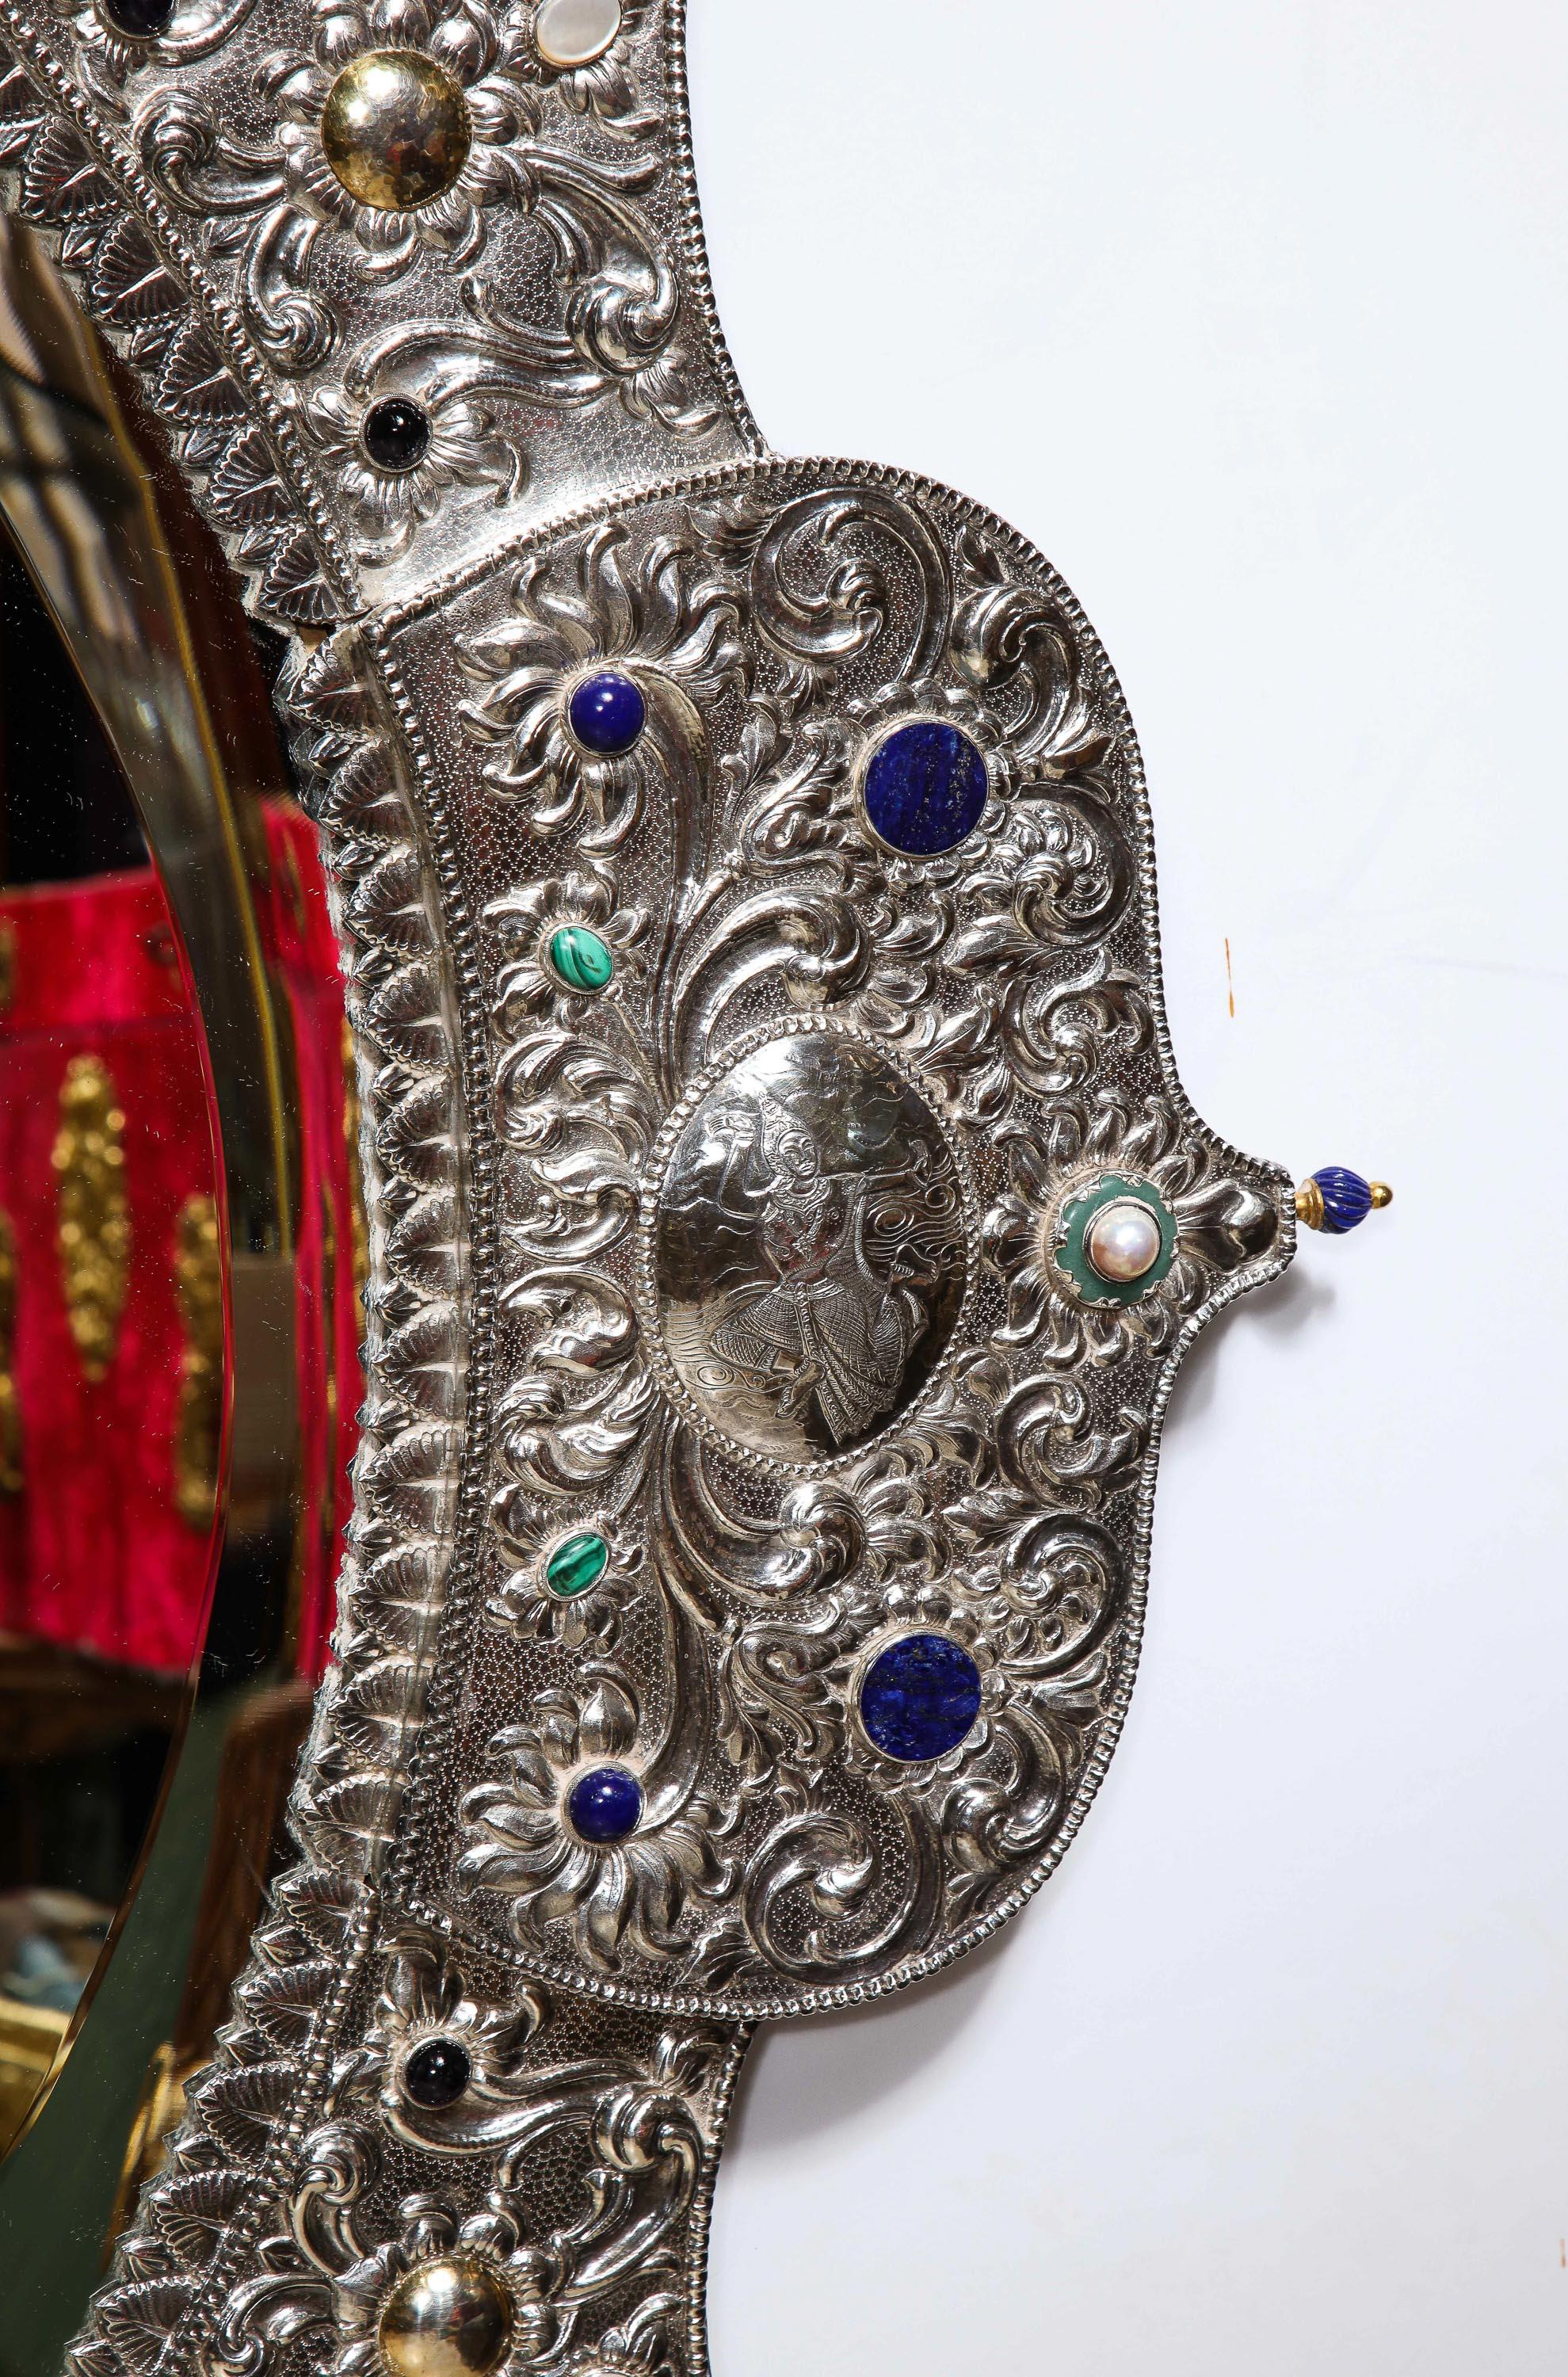 A rare and magnificent silver, gold & jeweled palace mirror, certainly made for an Indian Maharaja, circa 1900.

A special commission for an Indian palace from the late Victorian era, likely produced in Thailand. 

This palace size hand-hammered